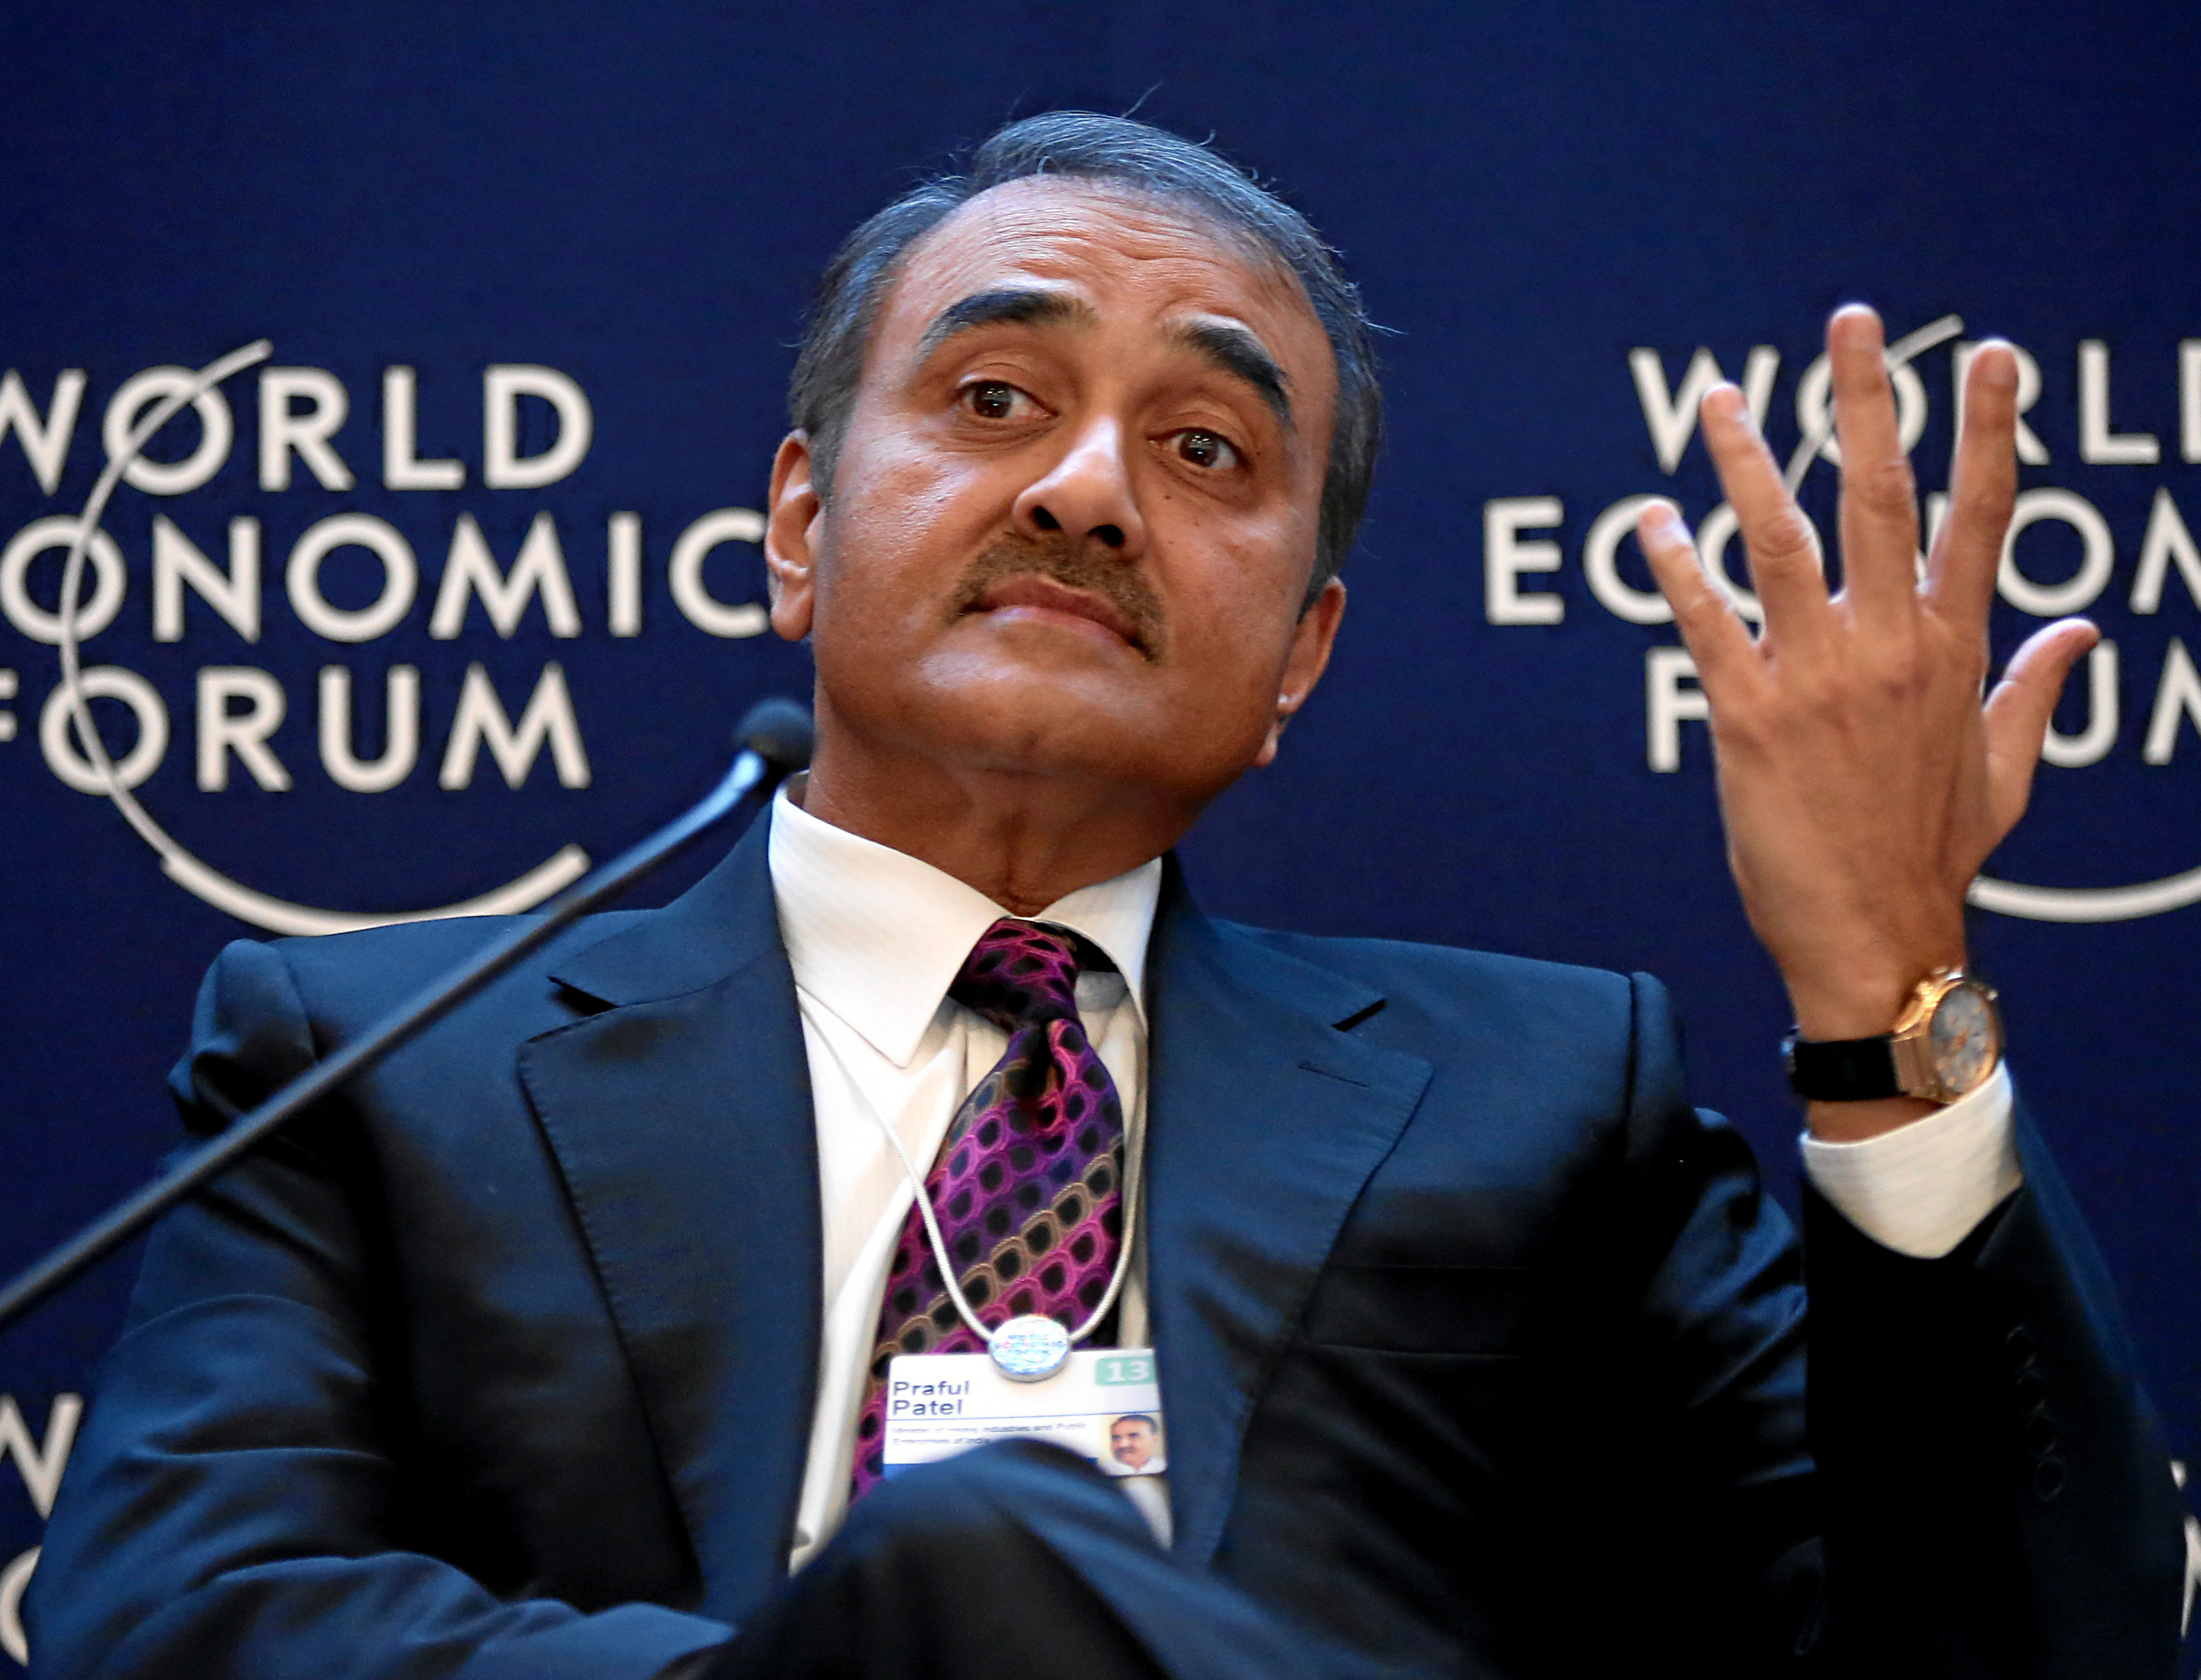 Praful Patel elected FIFA Council member, first from India